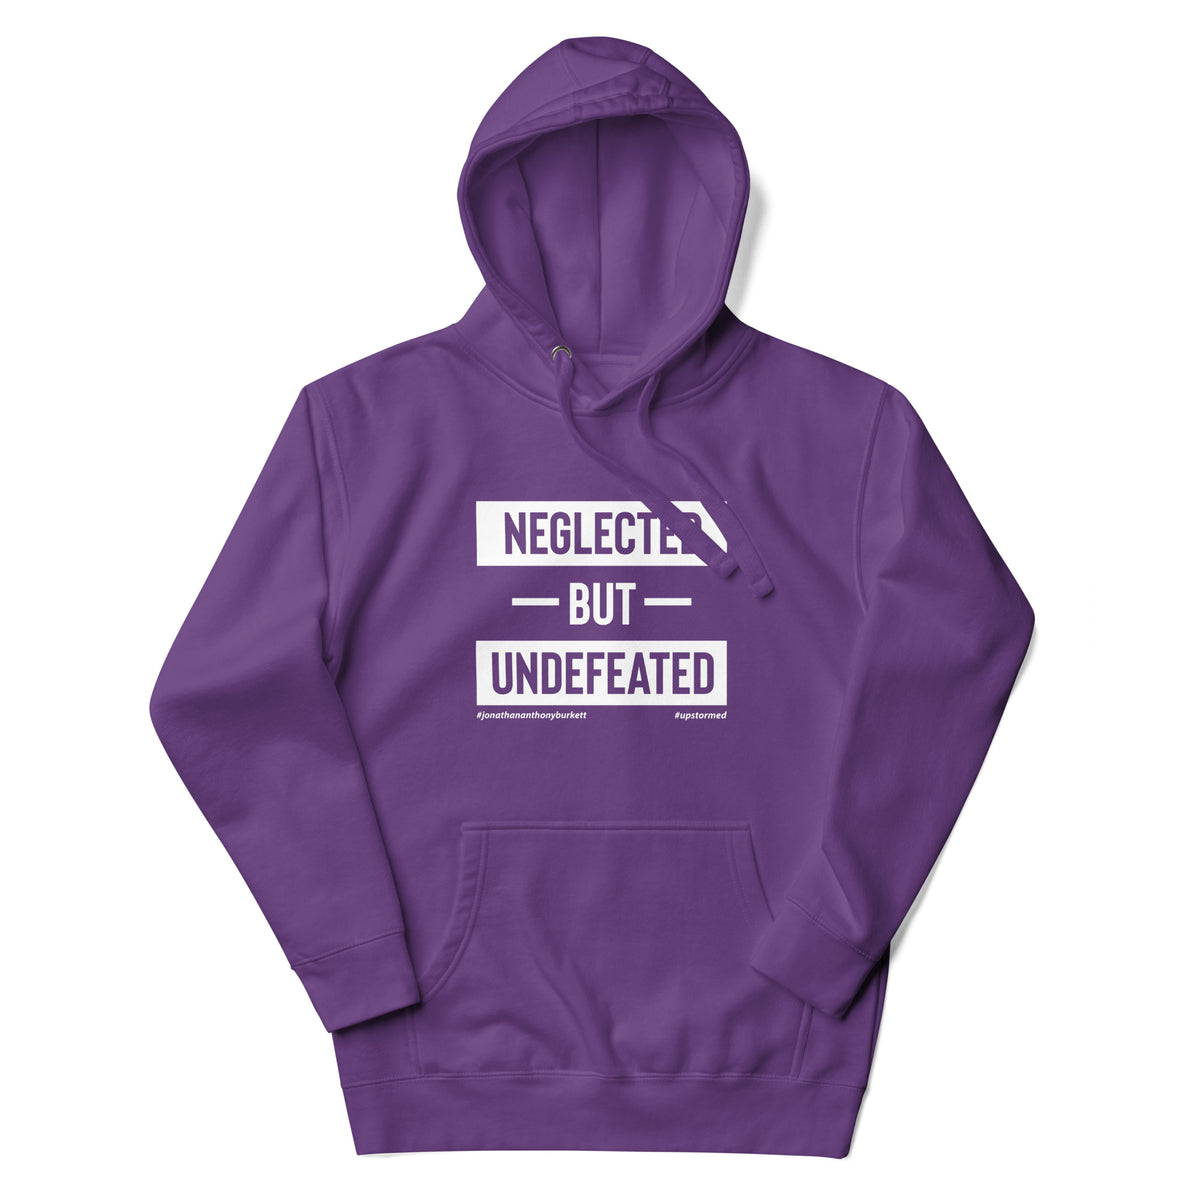 Neglected but Undefeated Upstormed Hoodie